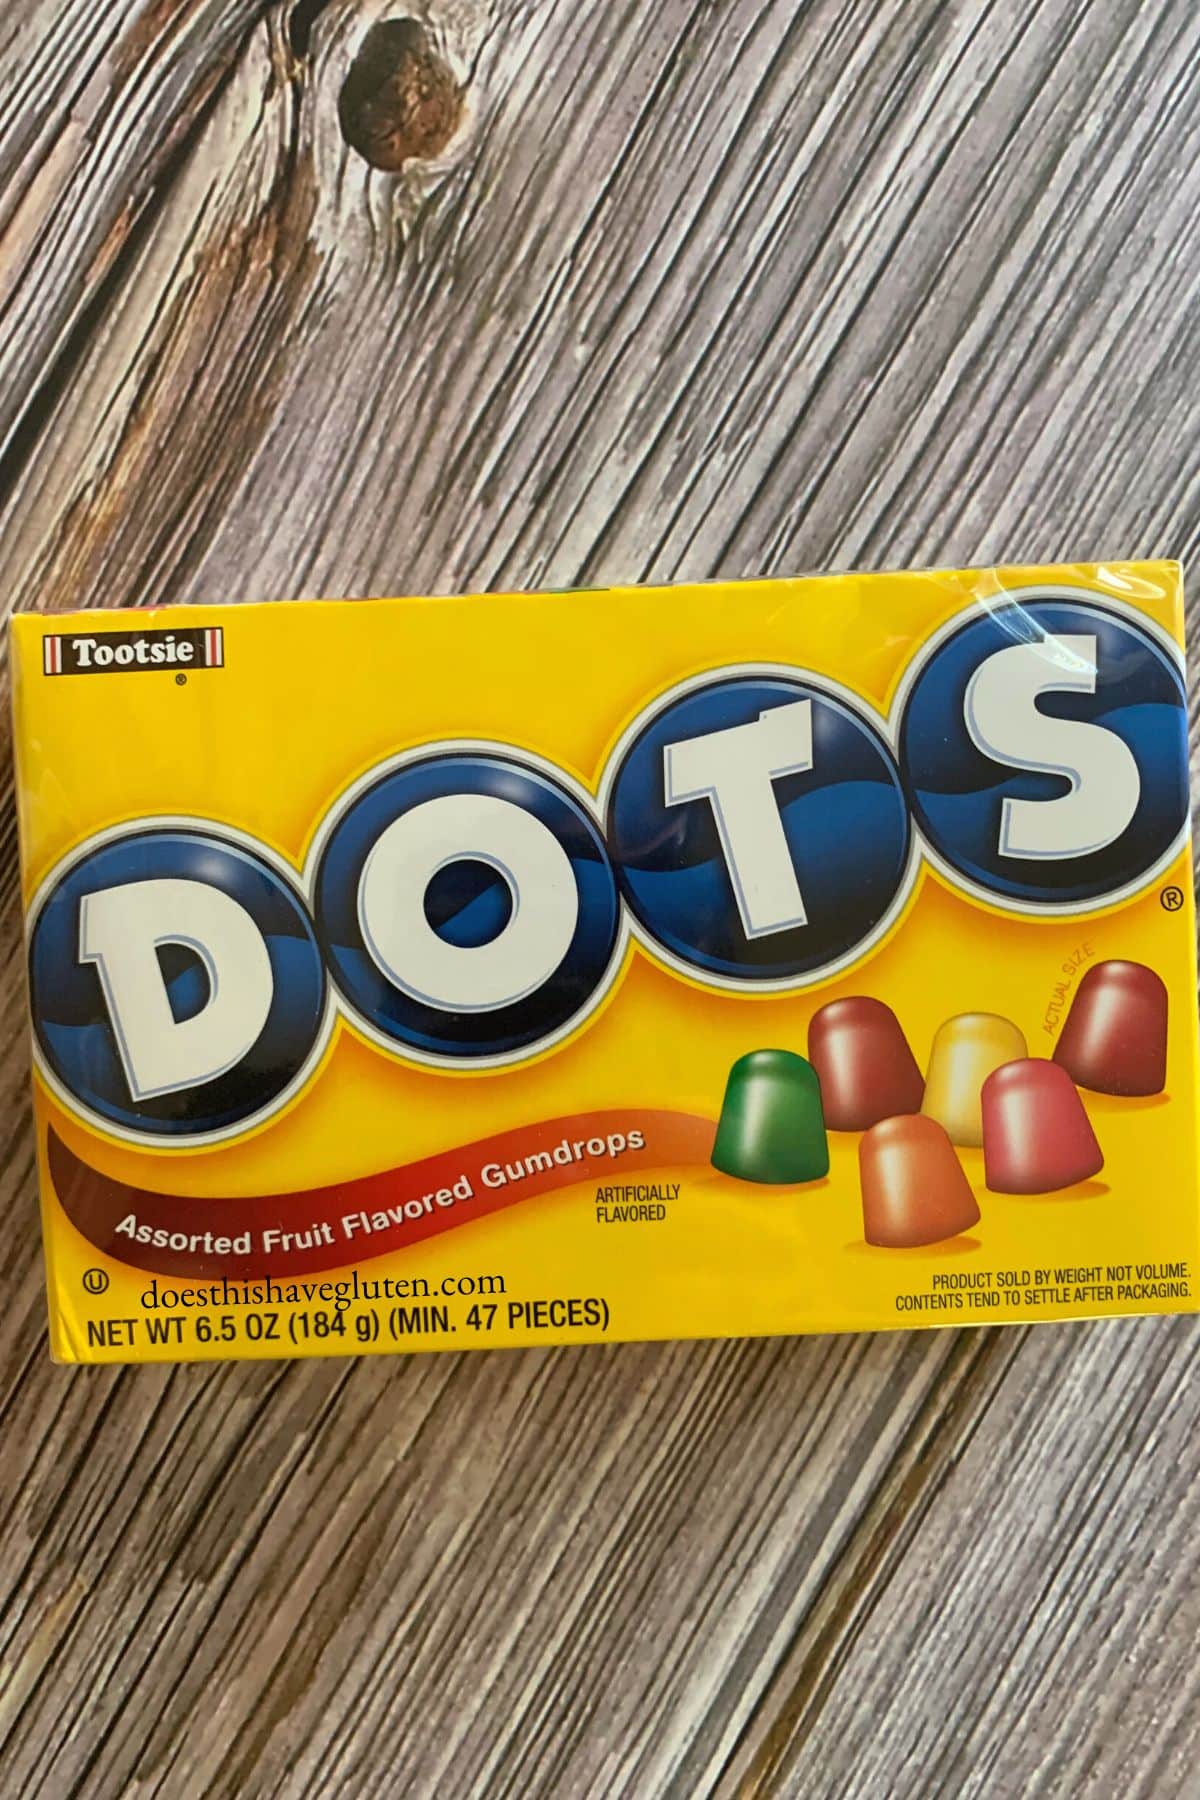 A box of dots candy on a wooden table.